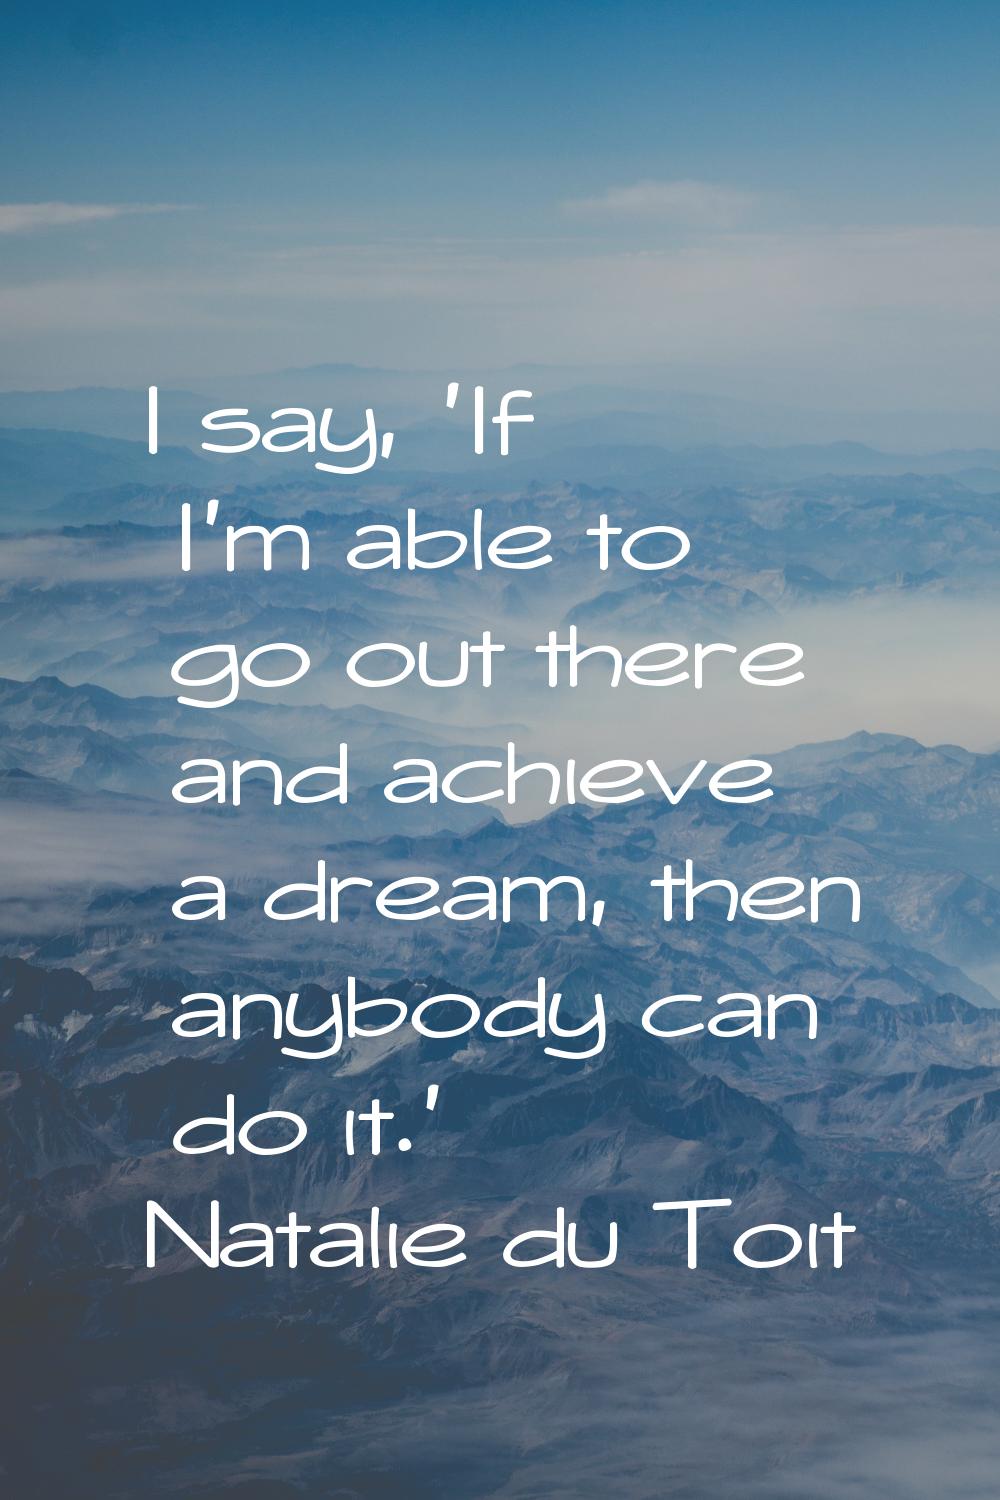 I say, 'If I'm able to go out there and achieve a dream, then anybody can do it.'